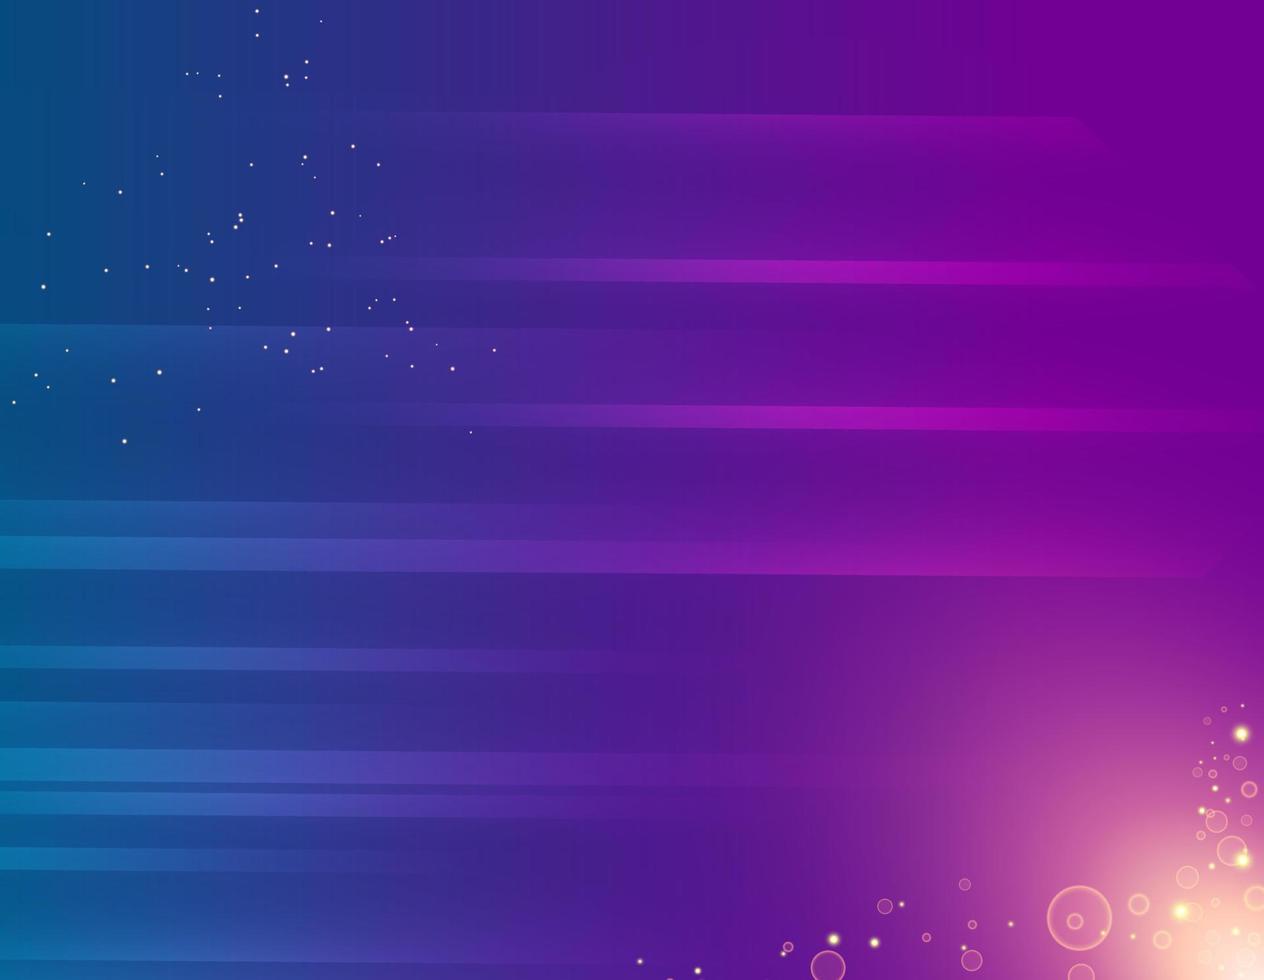 Blue and purple Abstract geometric diagonal lines background vector